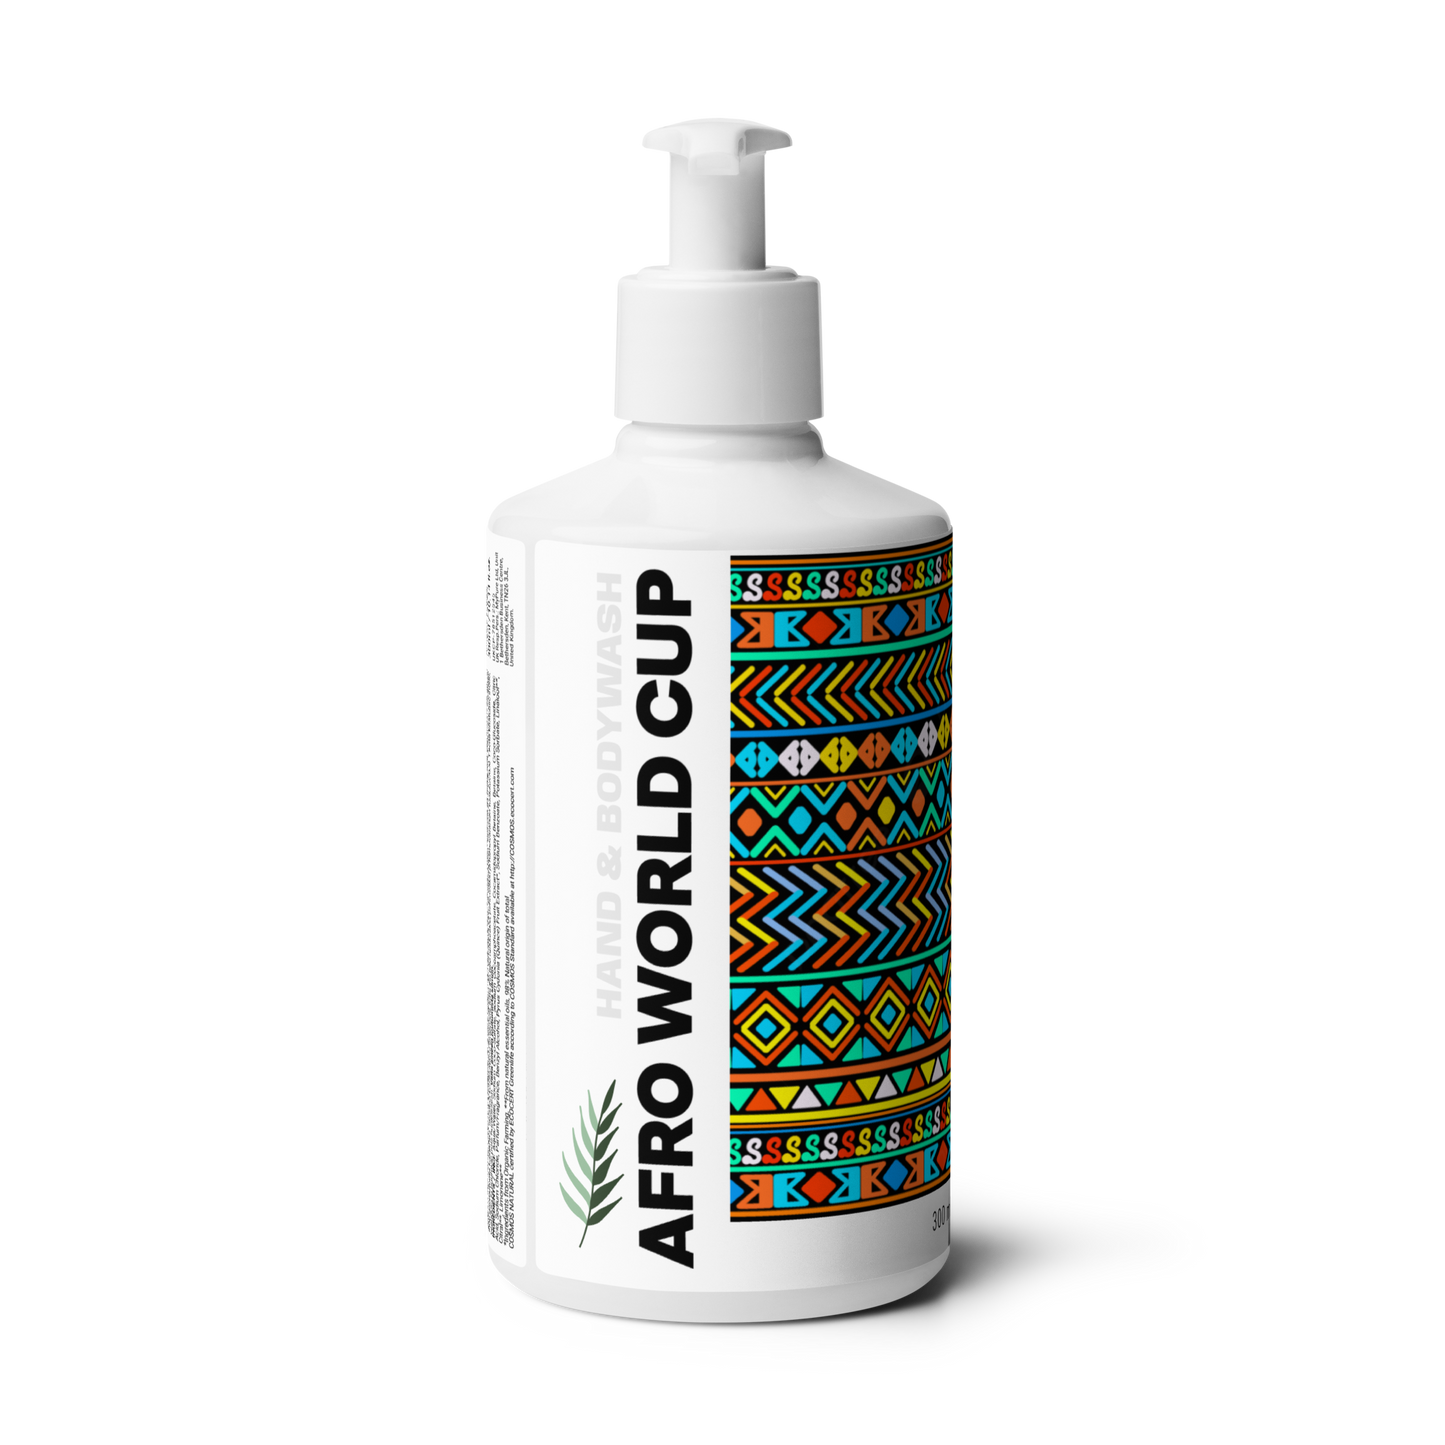 AFRO WORLD CUP Hand & Body Wash